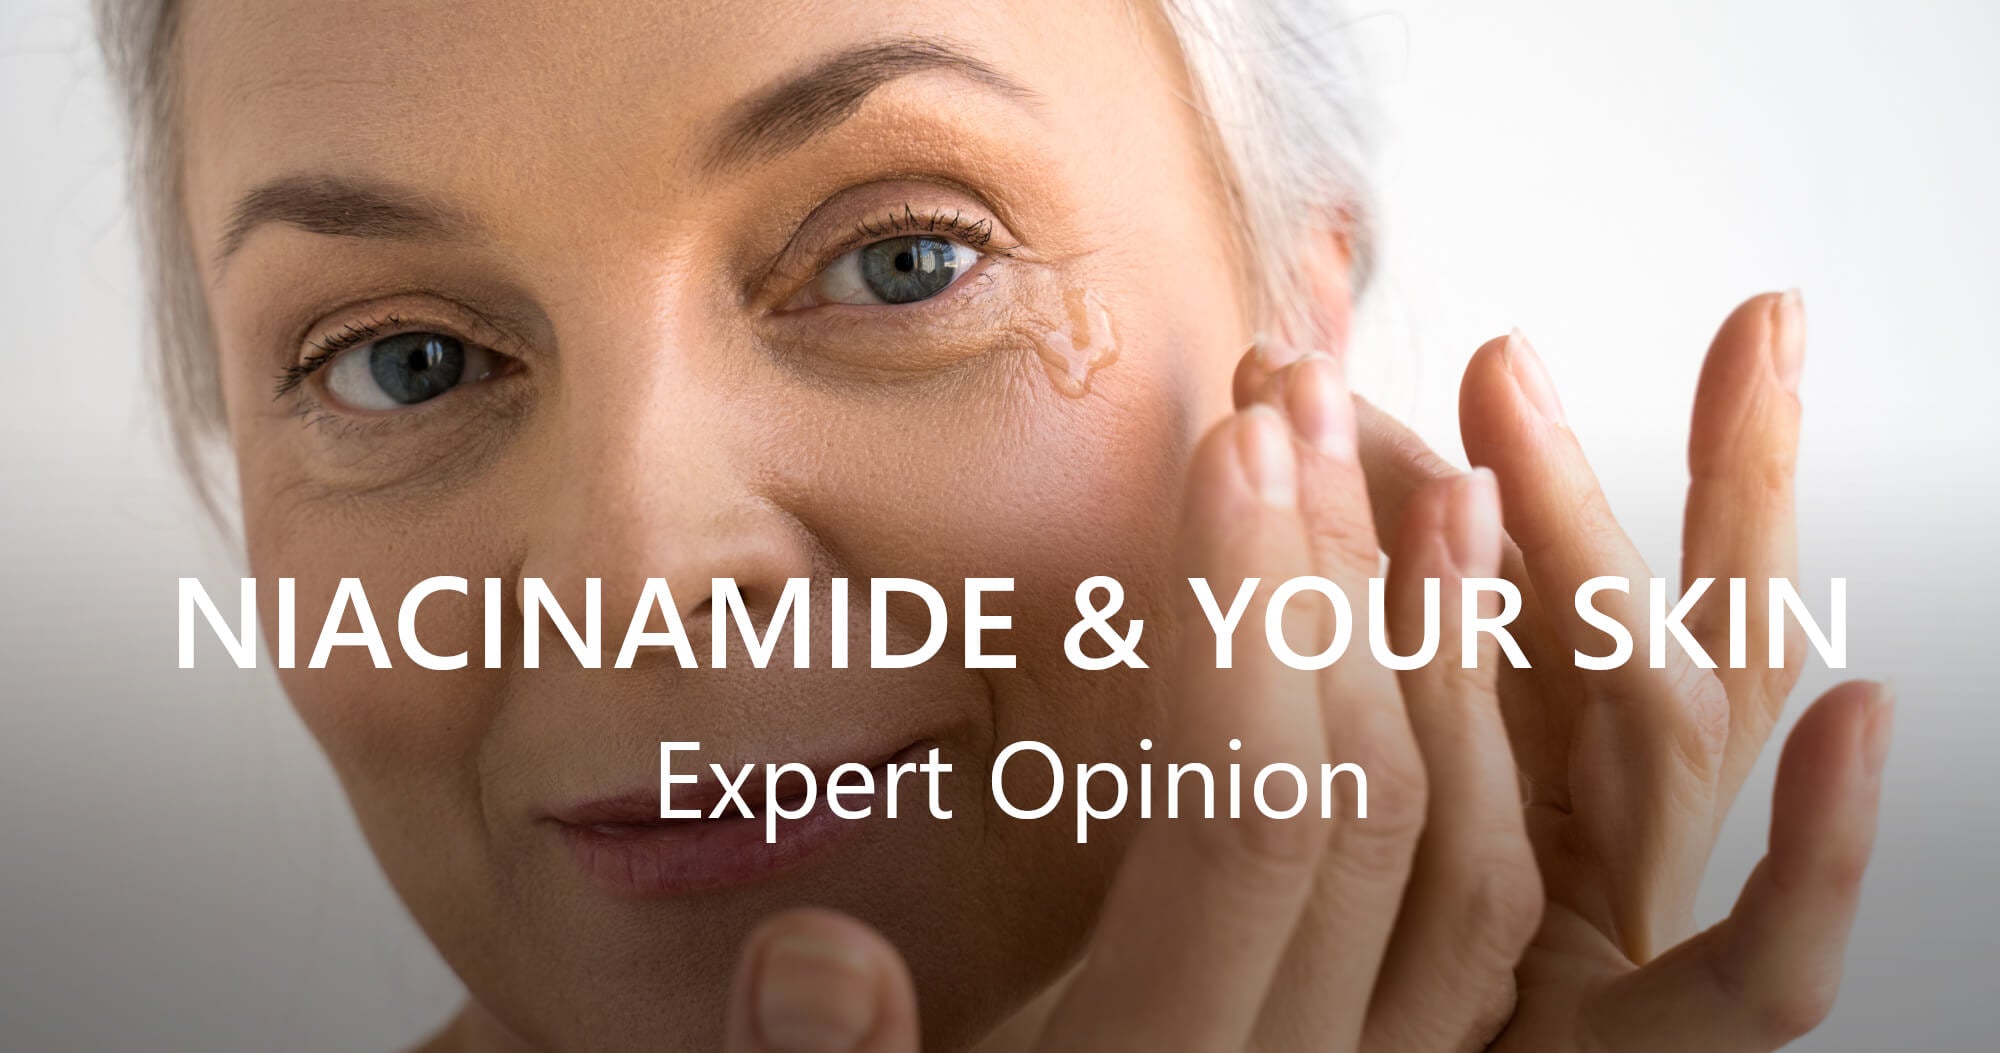 How does Niacinamide Benefit Your Skin? How to use it? According to Expert Opinion - Laduora